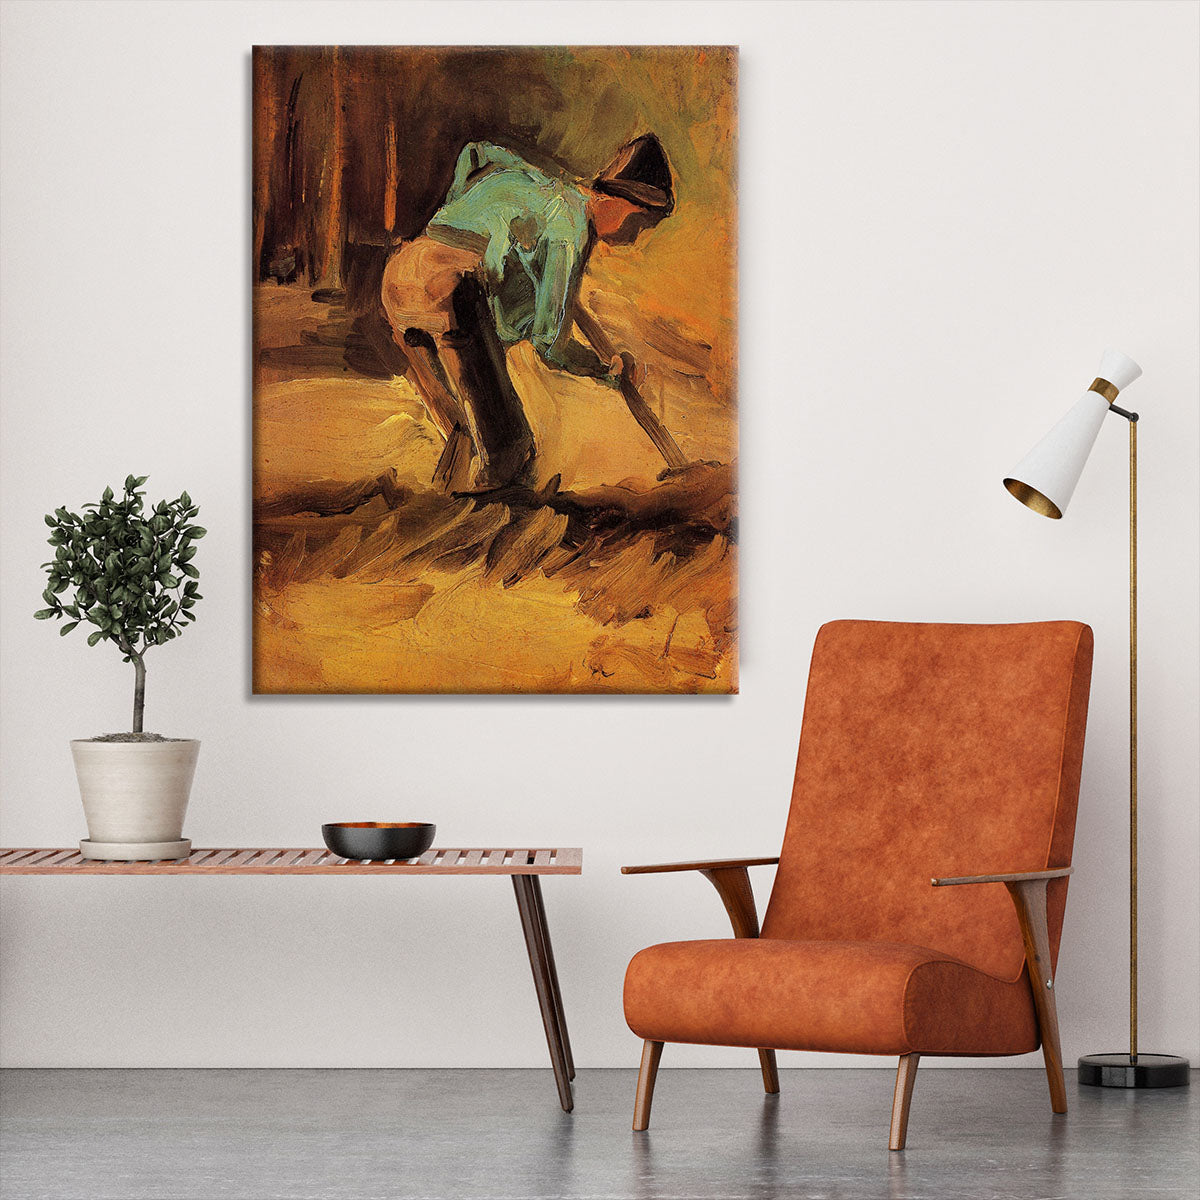 Man Stooping with Stick or Spade by Van Gogh Canvas Print or Poster - Canvas Art Rocks - 6